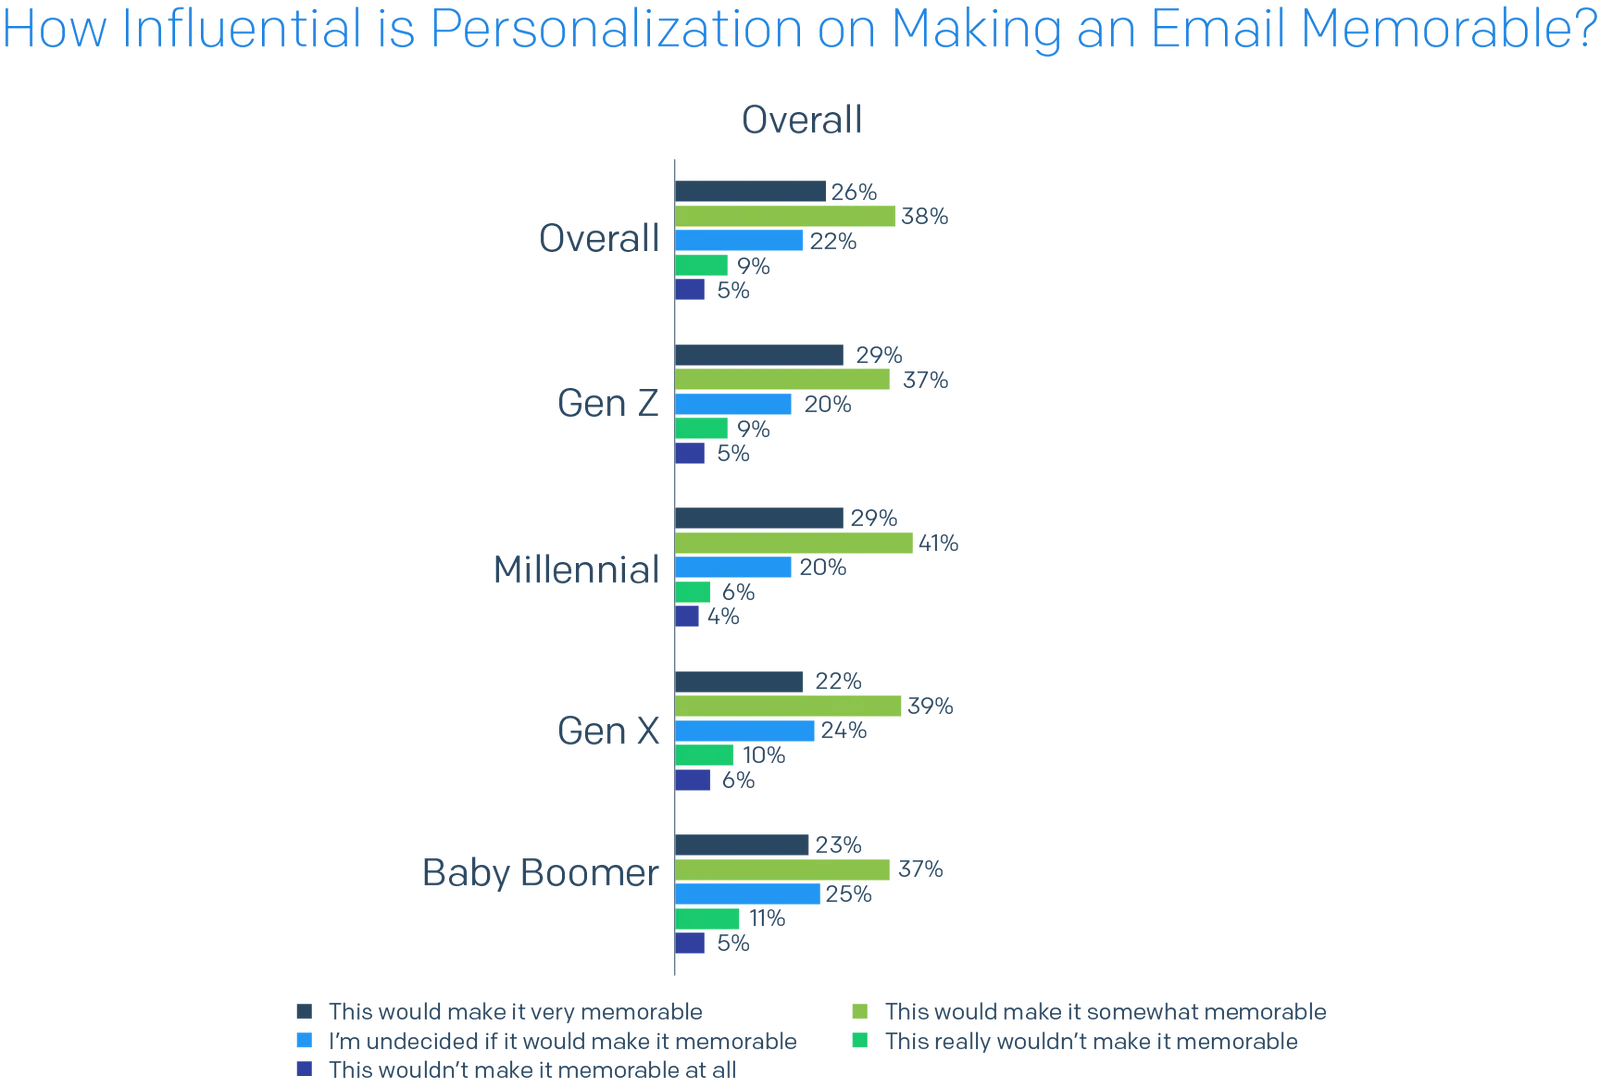 Bar chart of How Influential is Personalization on Making an Email Memorable?